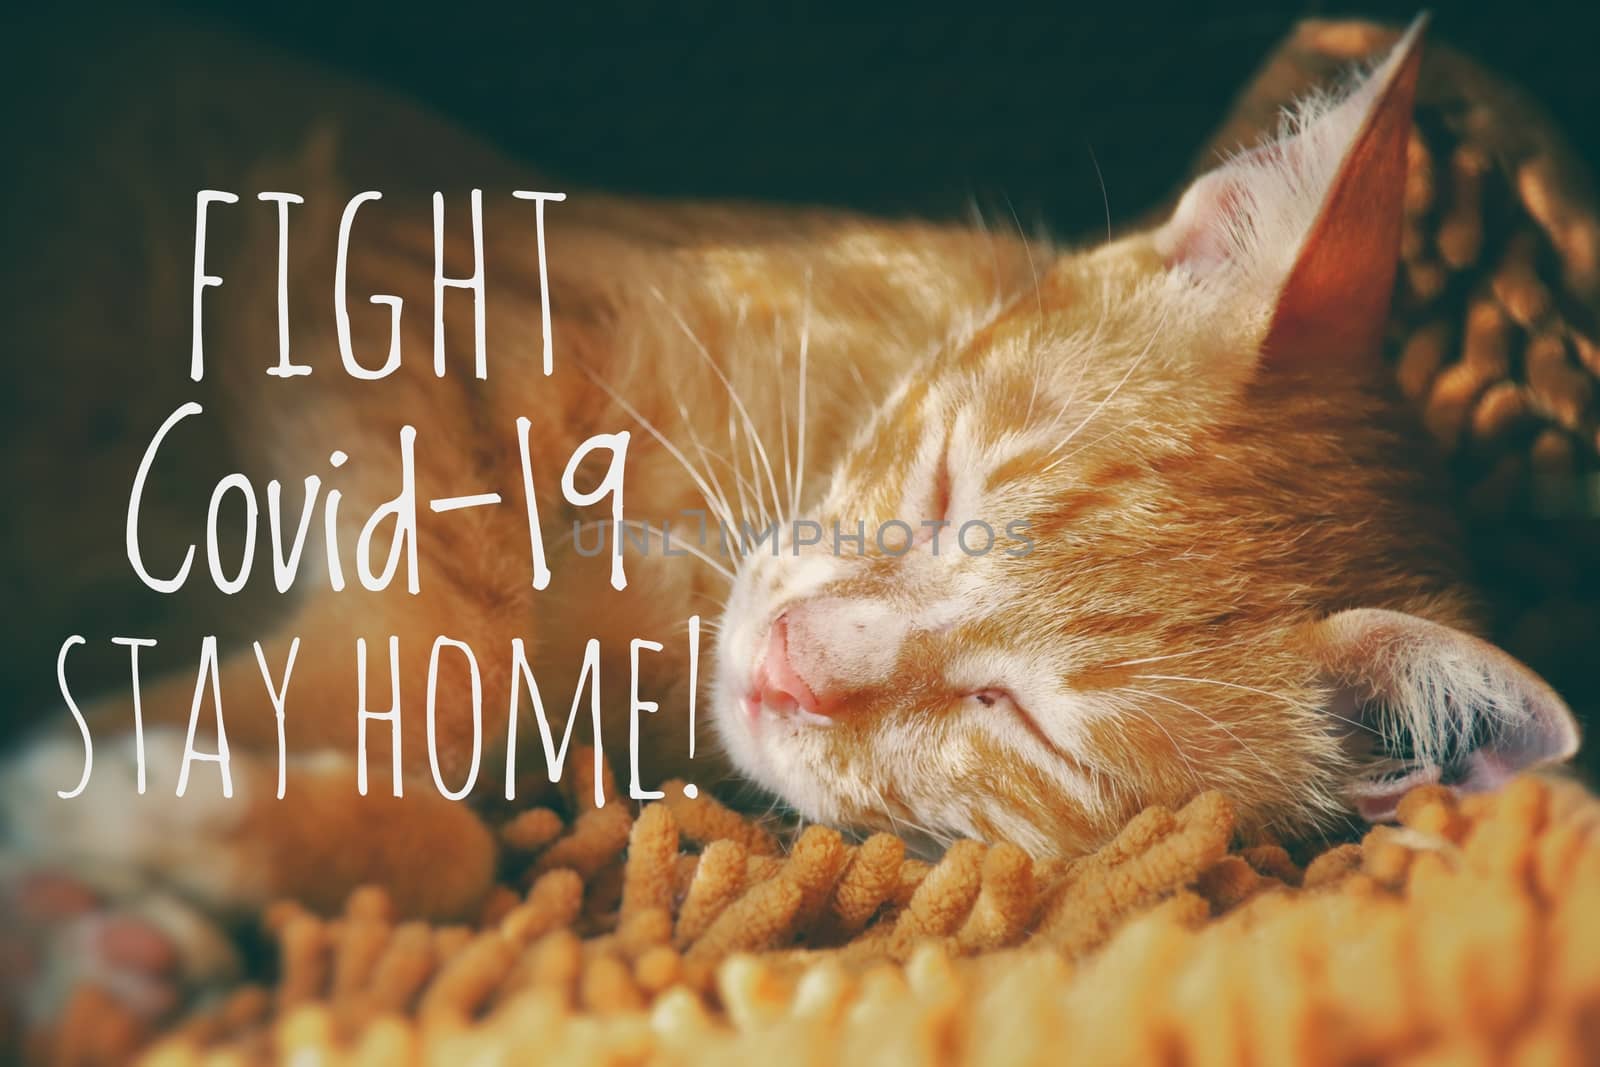 Cute feline and message to stay home with your cat and stay safe from the covid-19 outbreak by Sonnet15